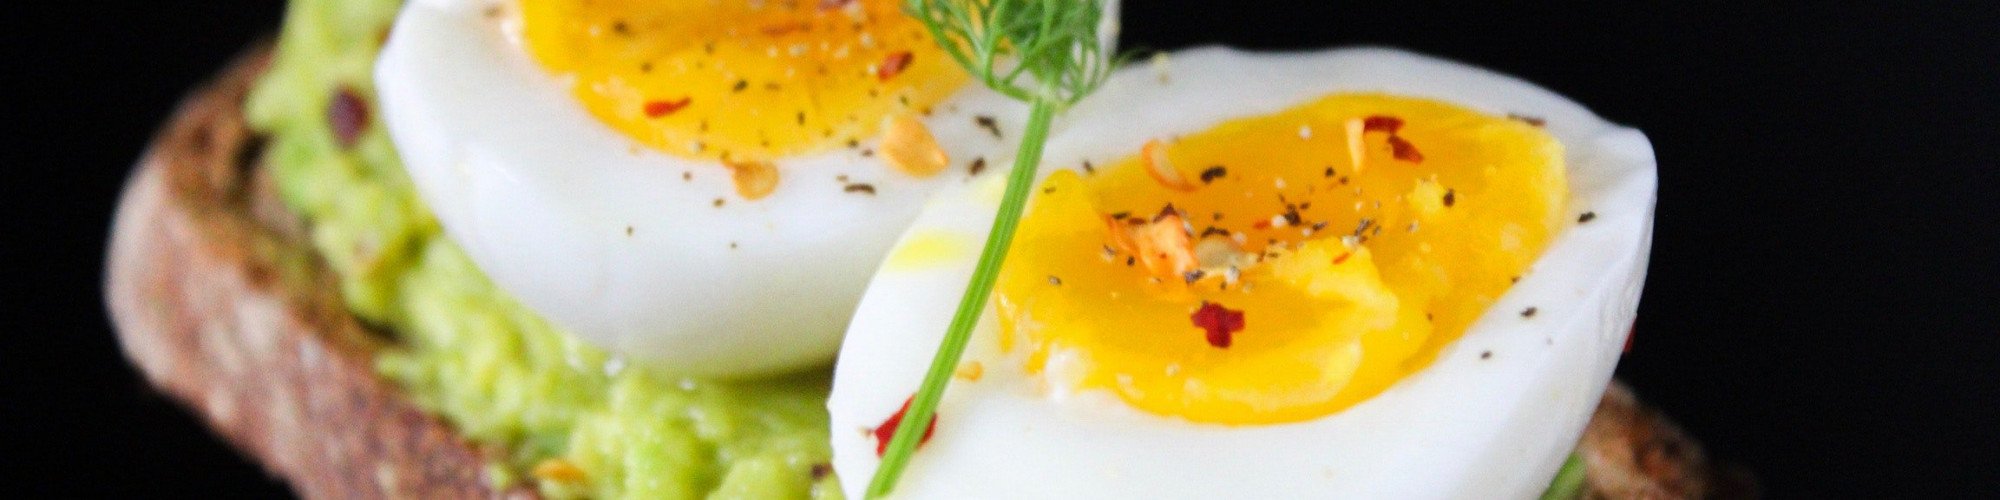 sliced egg on top of green salad with bread 824635